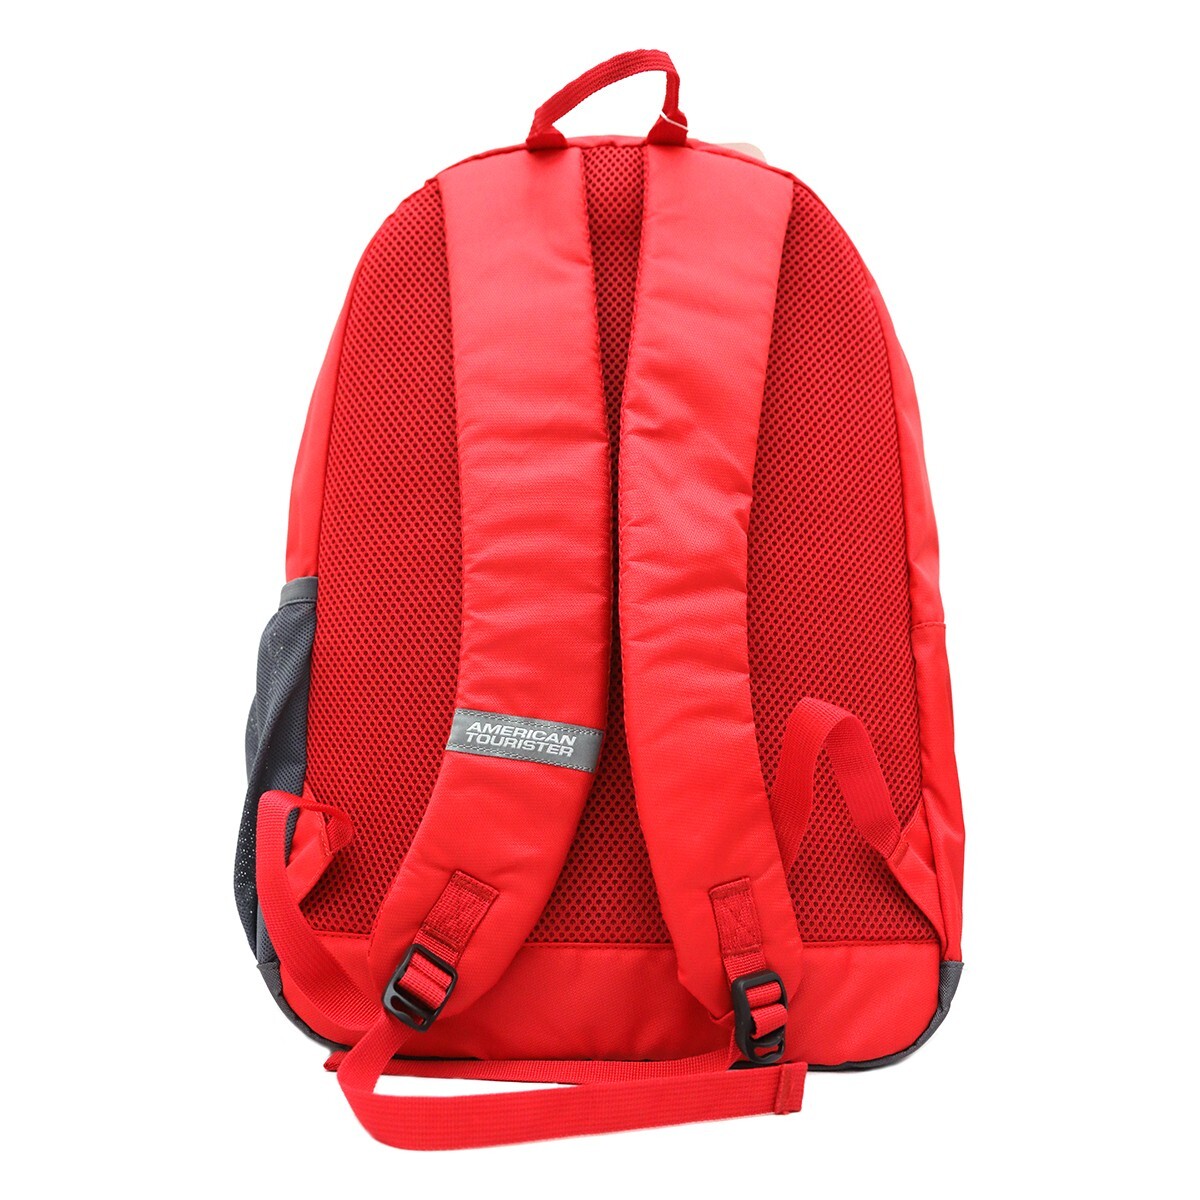 American Tourister Max+ BackPack 01 Red